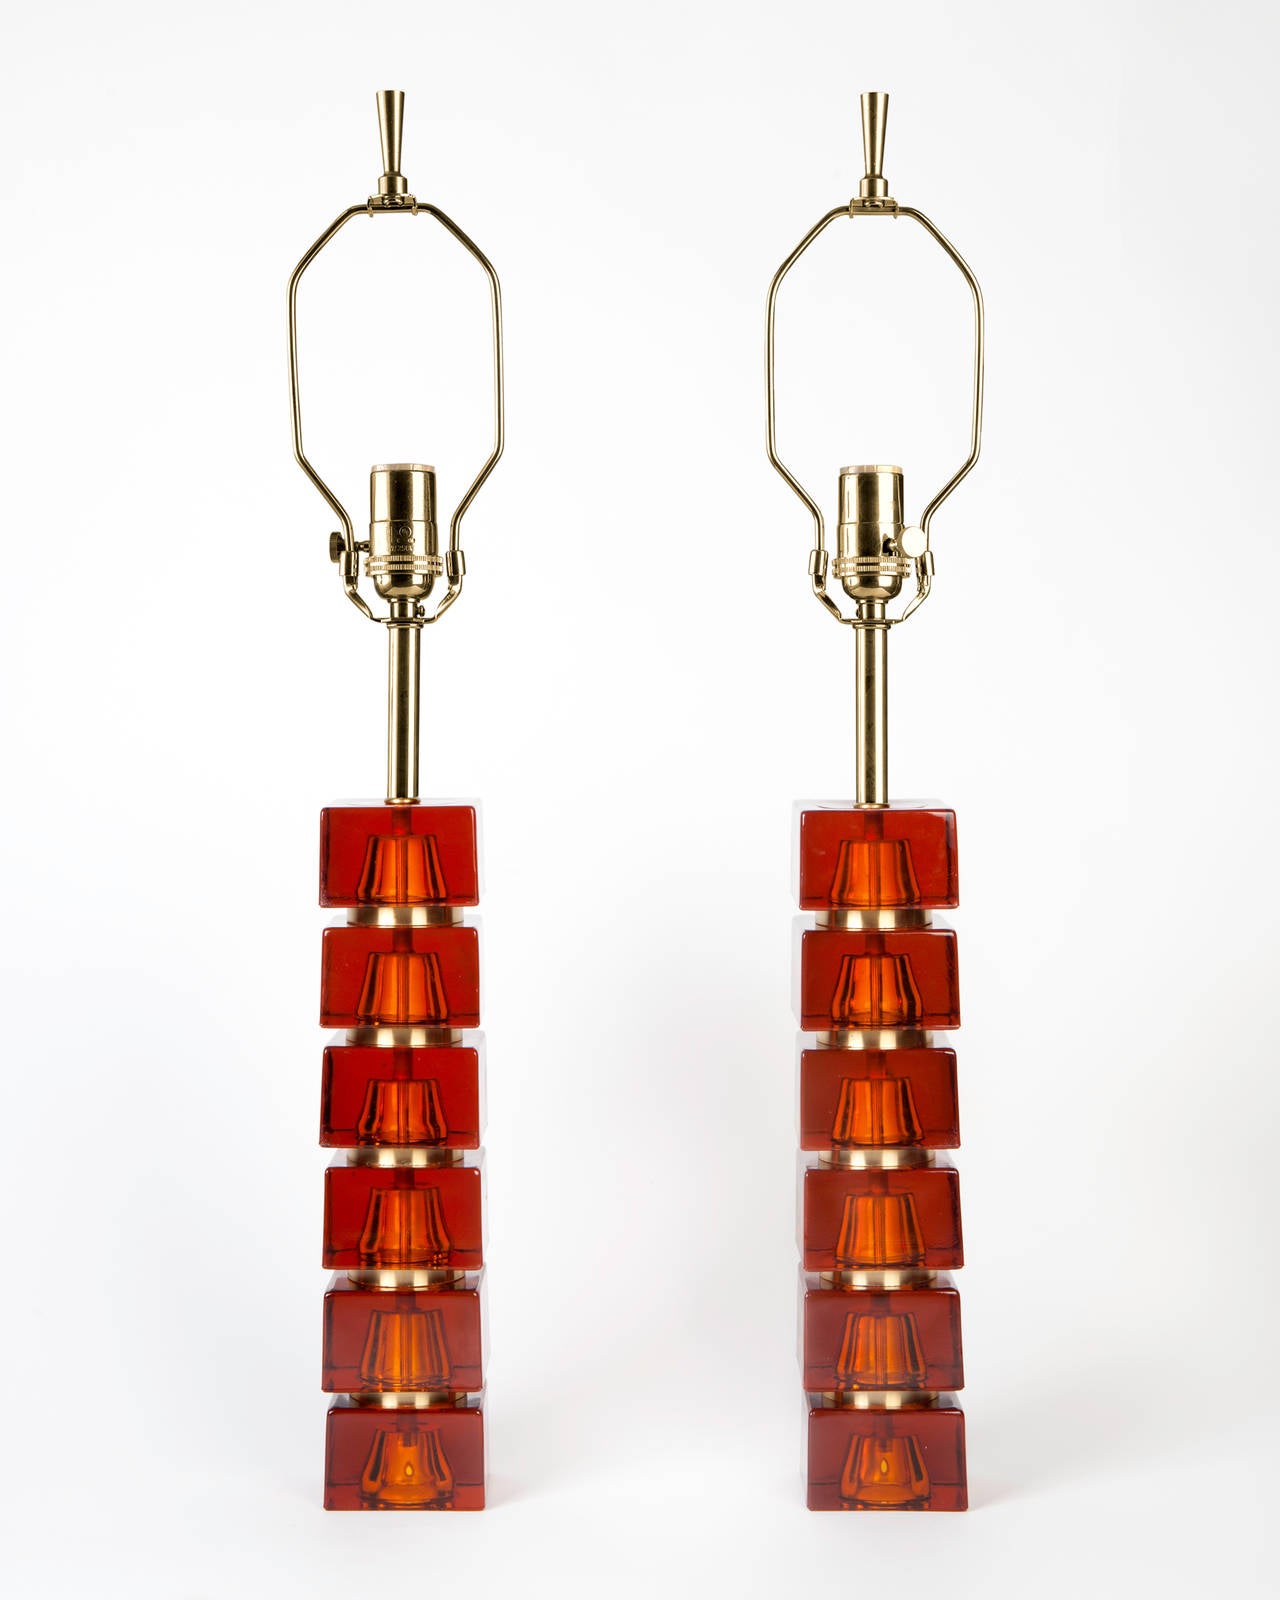 ATL1899

A pair of "stacked" lamps made of alternating brass discs and squared orange glass pieces. By Carl Fagerlund for the Swedish maker Orrefors. Due to the antique nature of this fixture, there may be some nicks or imperfections in